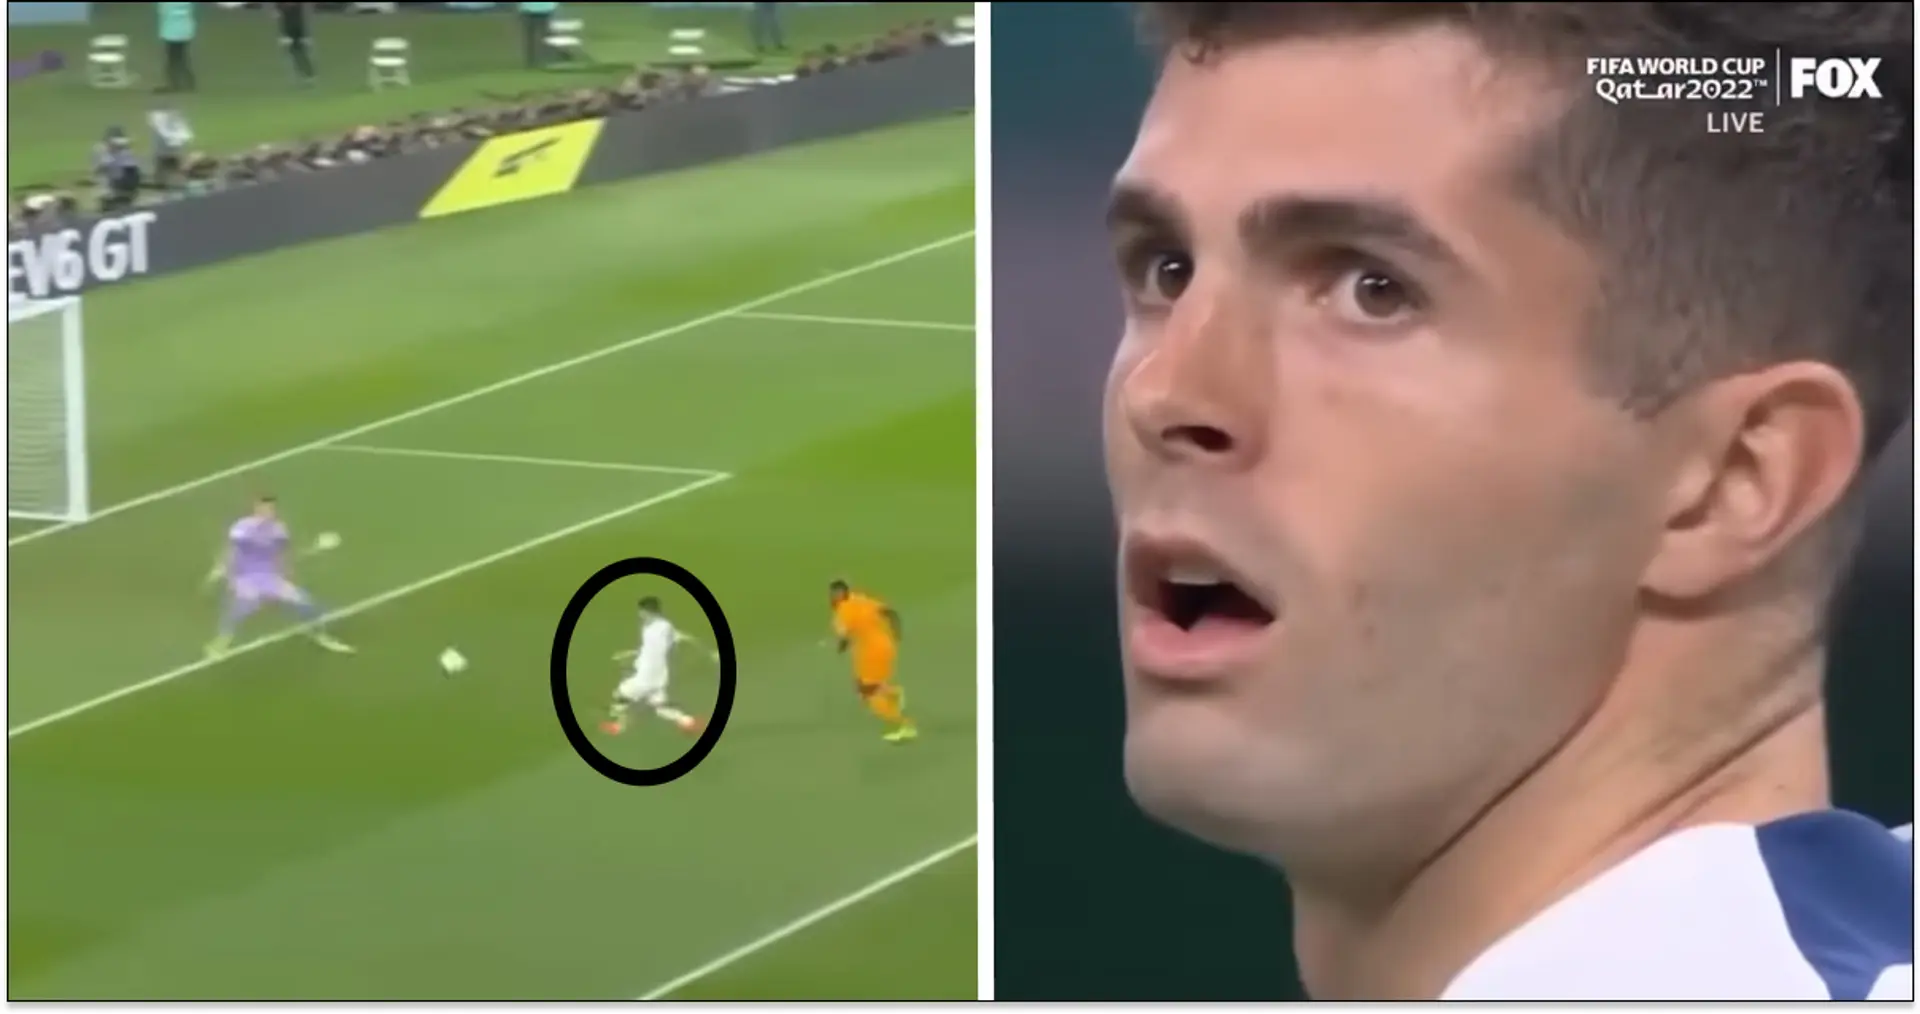 Pulisic misses great chance v Netherlands, says he didn't score because he thought he was offside